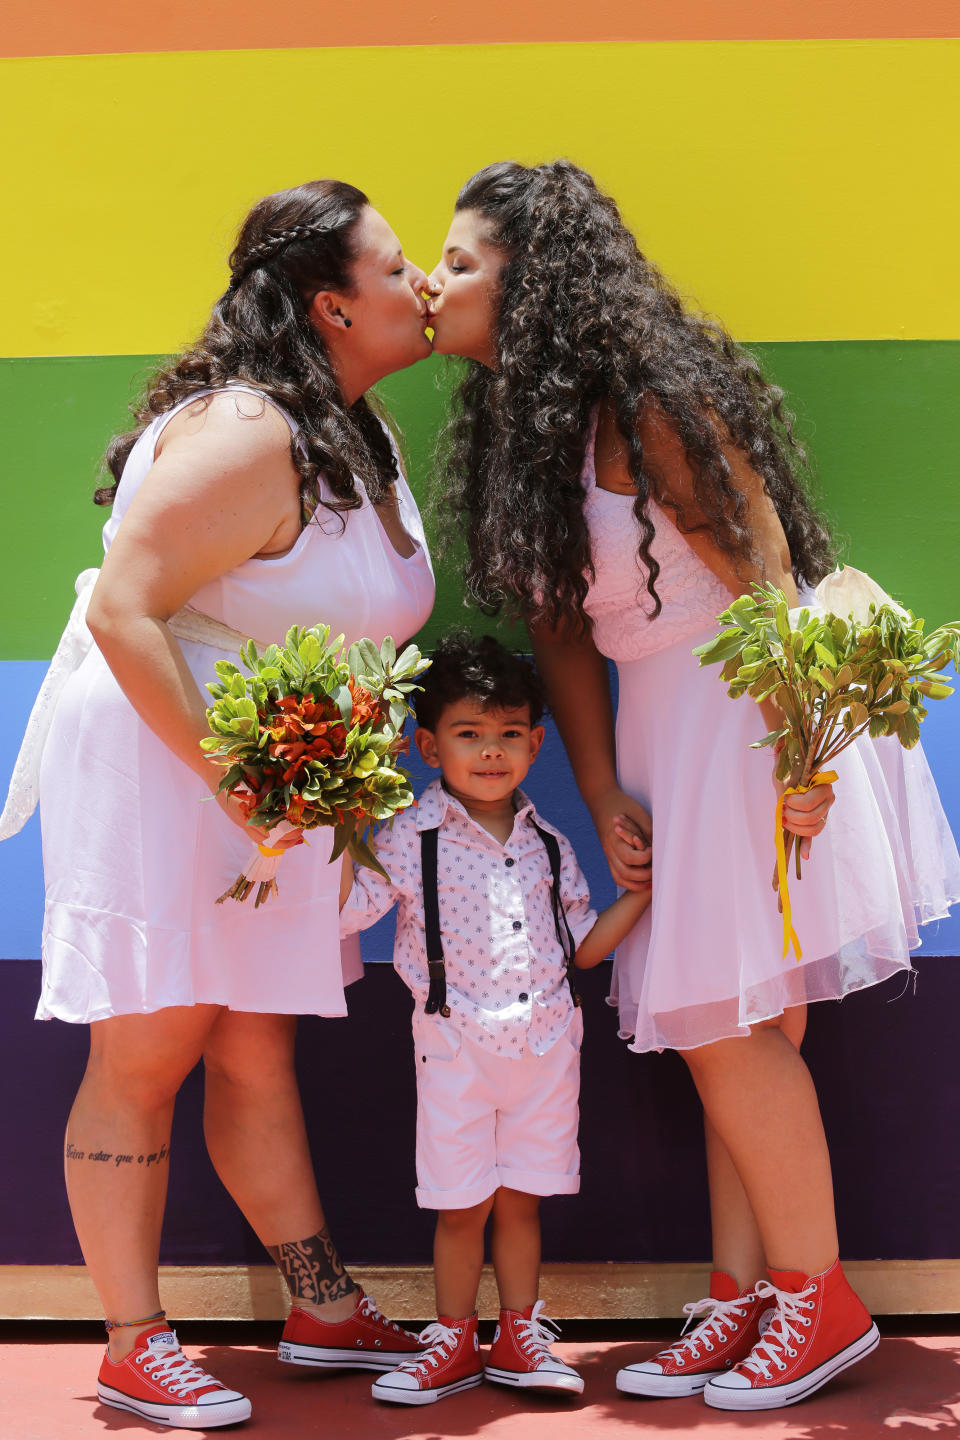 Newlyweds Thais Lococo Hansen, 32, left, and her partner Catarina Brainer, 28, share a kiss, as their son Pietro, 3, looks on during a group marriage of forty same sex couples in Sao Paulo, Brazil, on Saturday, Dec. 15, 2018. With the election of ultra-rightist Jair Bolsonaro as president, hundreds of same sex couples began to marry, fearing that the administration of Bolsonaro, who accumulates a history of homophobic and derogatory comments towards gays, could hinder the union of people of the same sex. (AP Photo/Nelson Antoine)